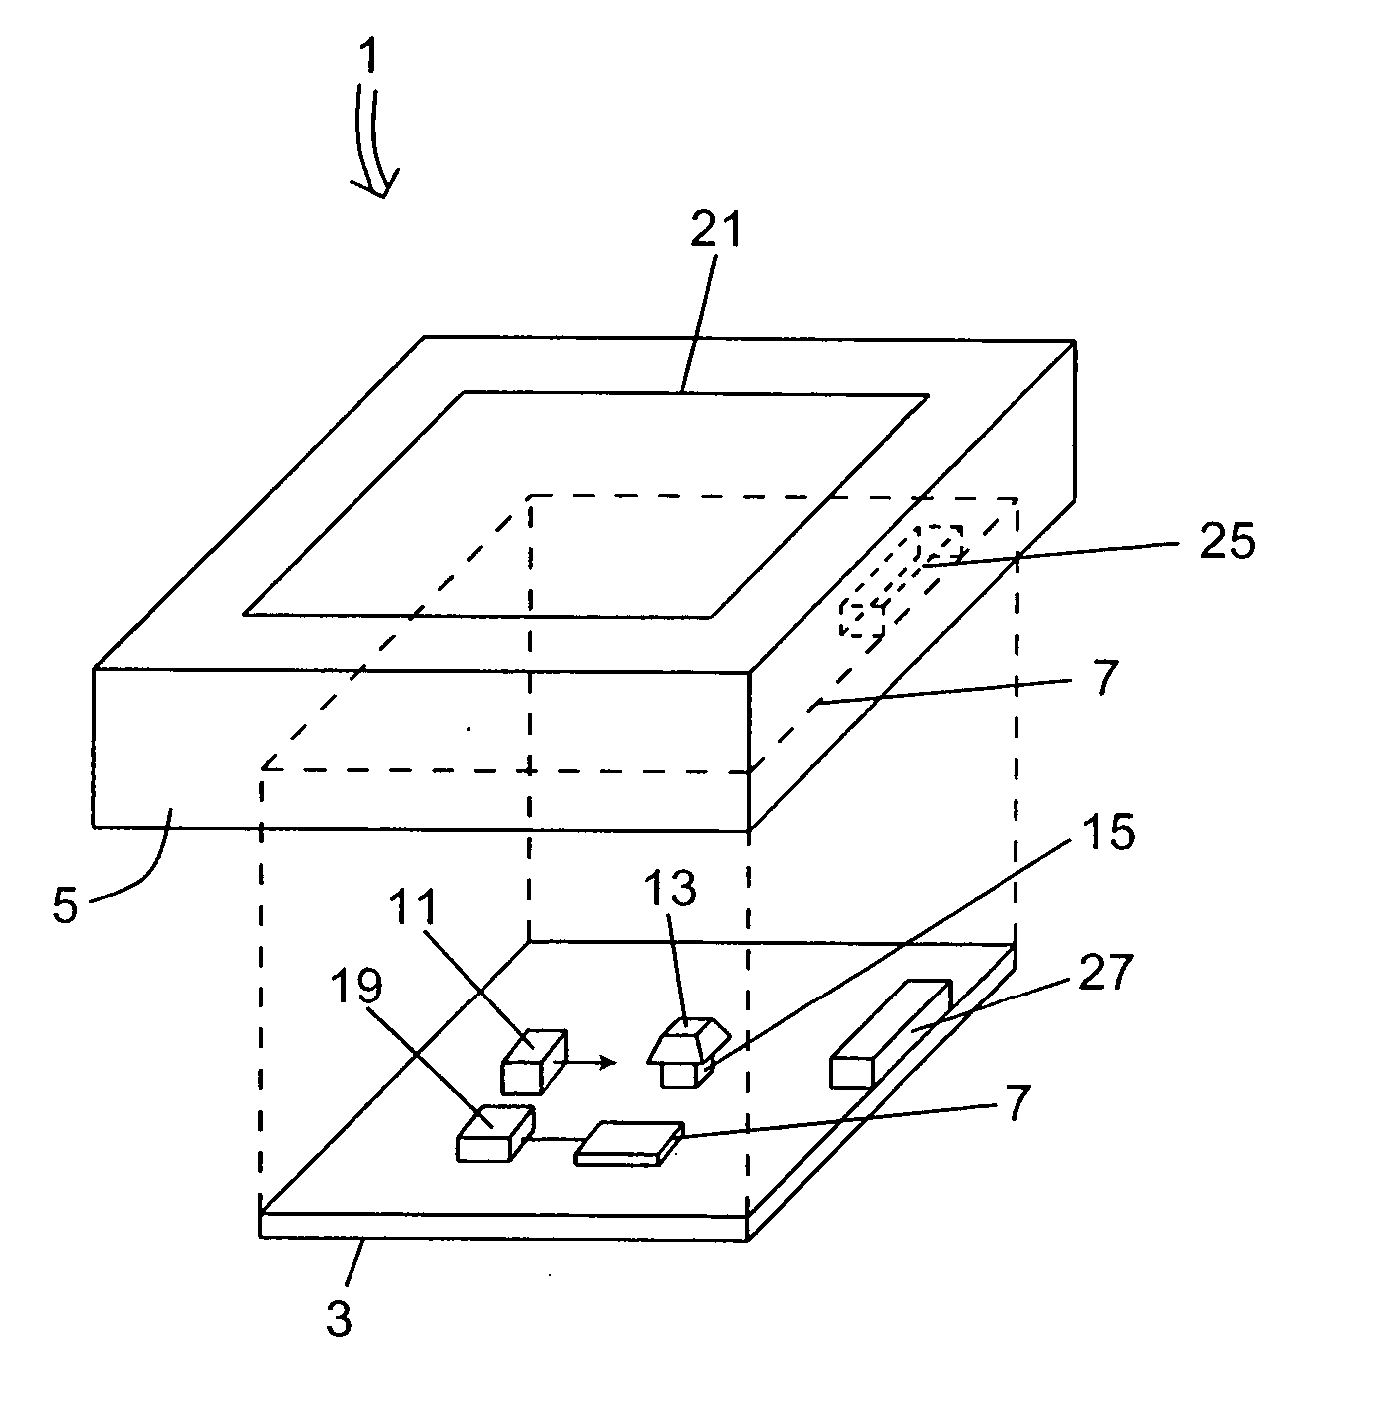 Modular omnidirectional bar code symbol scanning system with at least one service port for removable installation of scan module insert